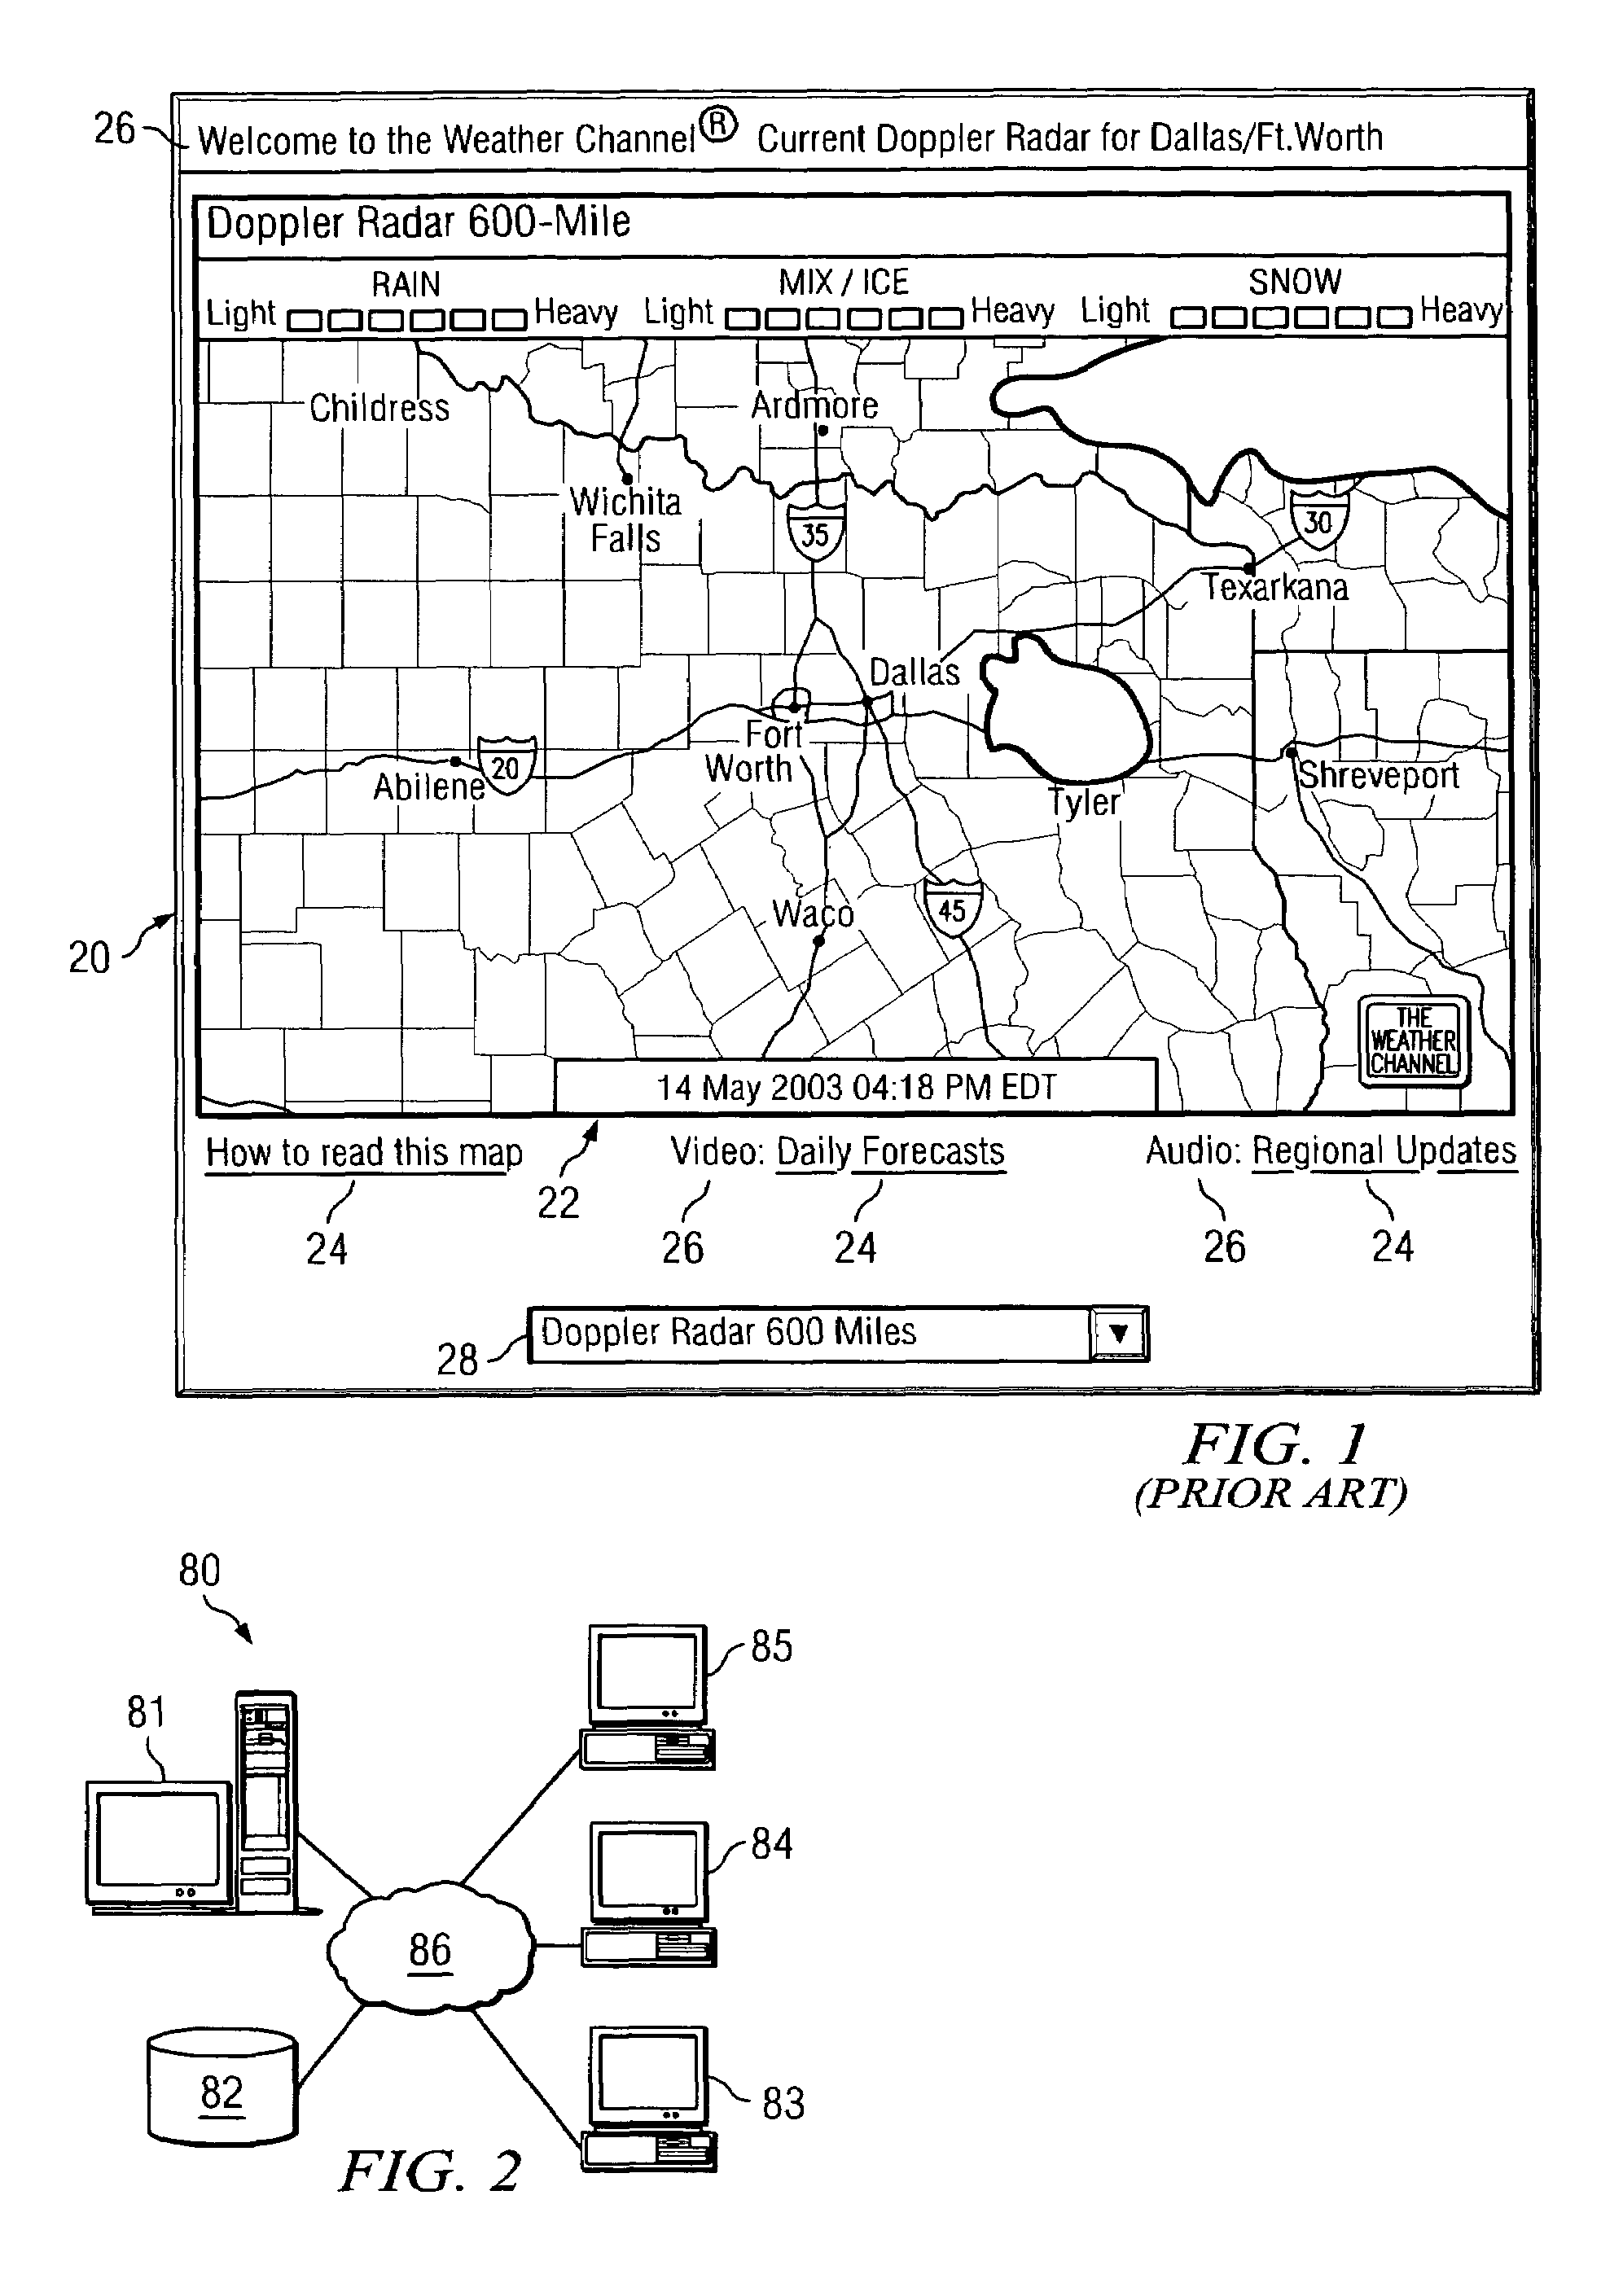 Apparatus and method for distributing portions of large web images to fit smaller constrained viewing areas